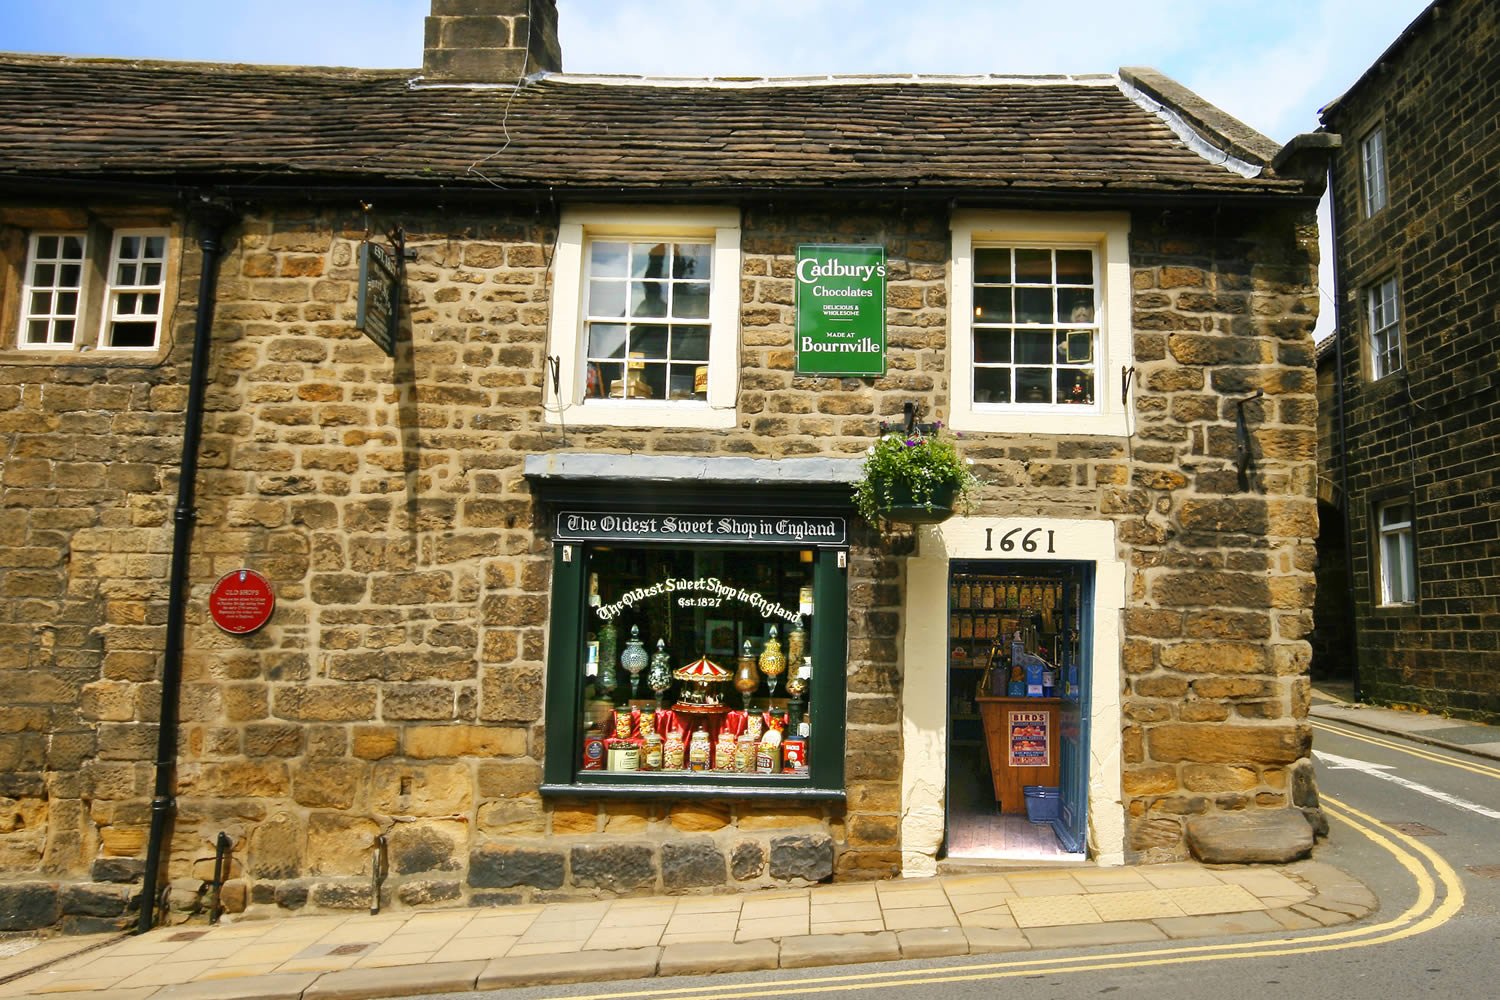 Image name The Oldest Sweet Shop in the World the 6 image from the post The Oldest Sweet Shop in the World in Yorkshire.com.